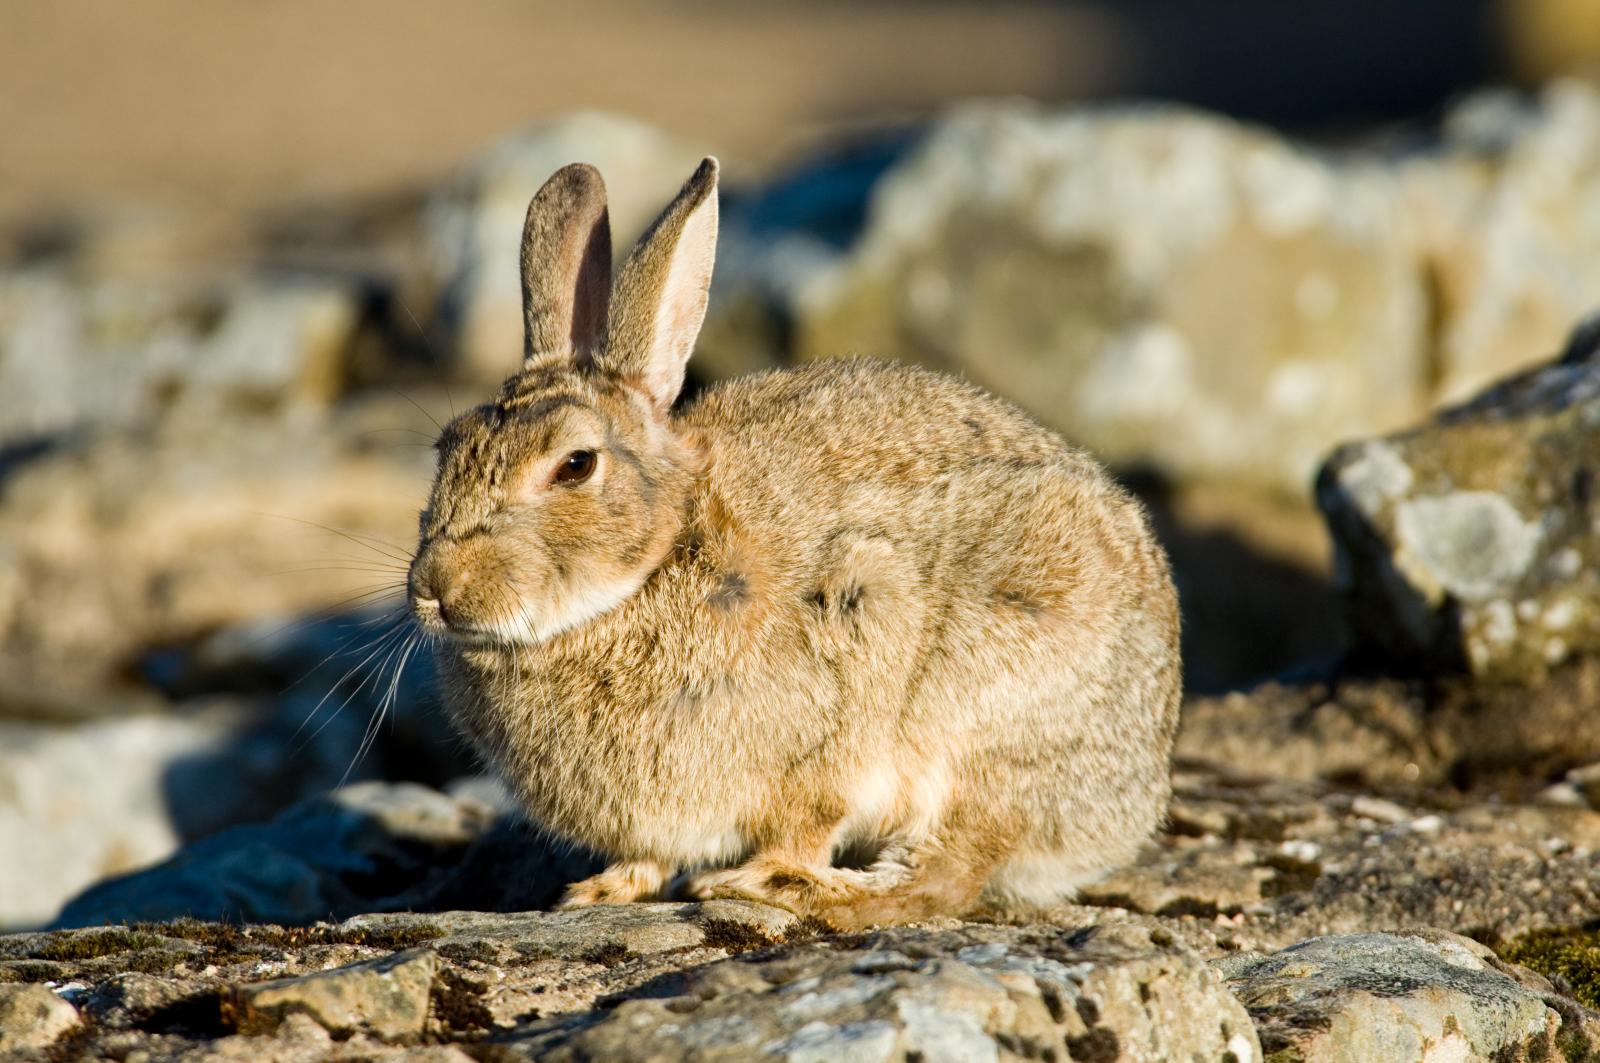 Rabbit photographed on a stone wall at Housesteads Roman Fort, Hadrian's Wall